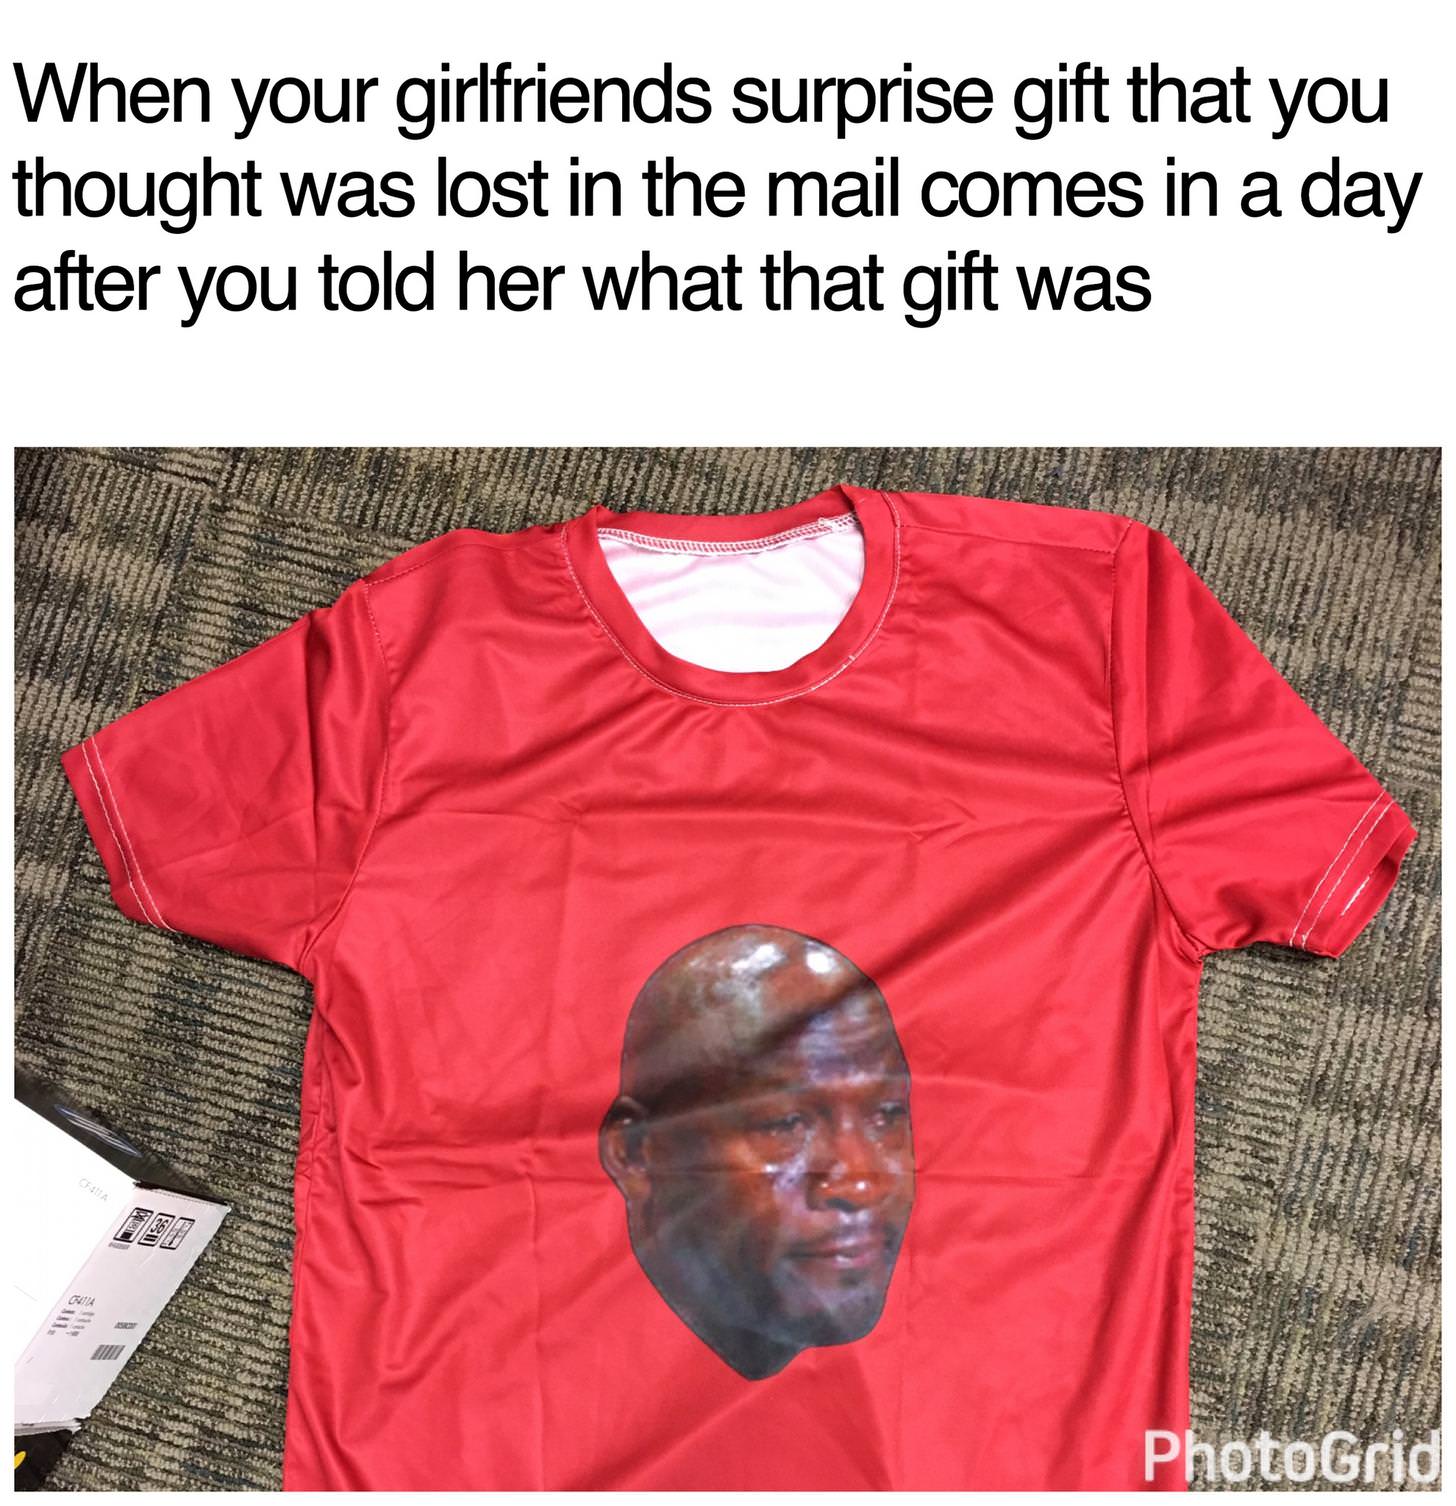 t shirt - When your girlfriends surprise gift that you thought was lost in the mail comes in a day after you told her what that gift was 18 PhotoGrid